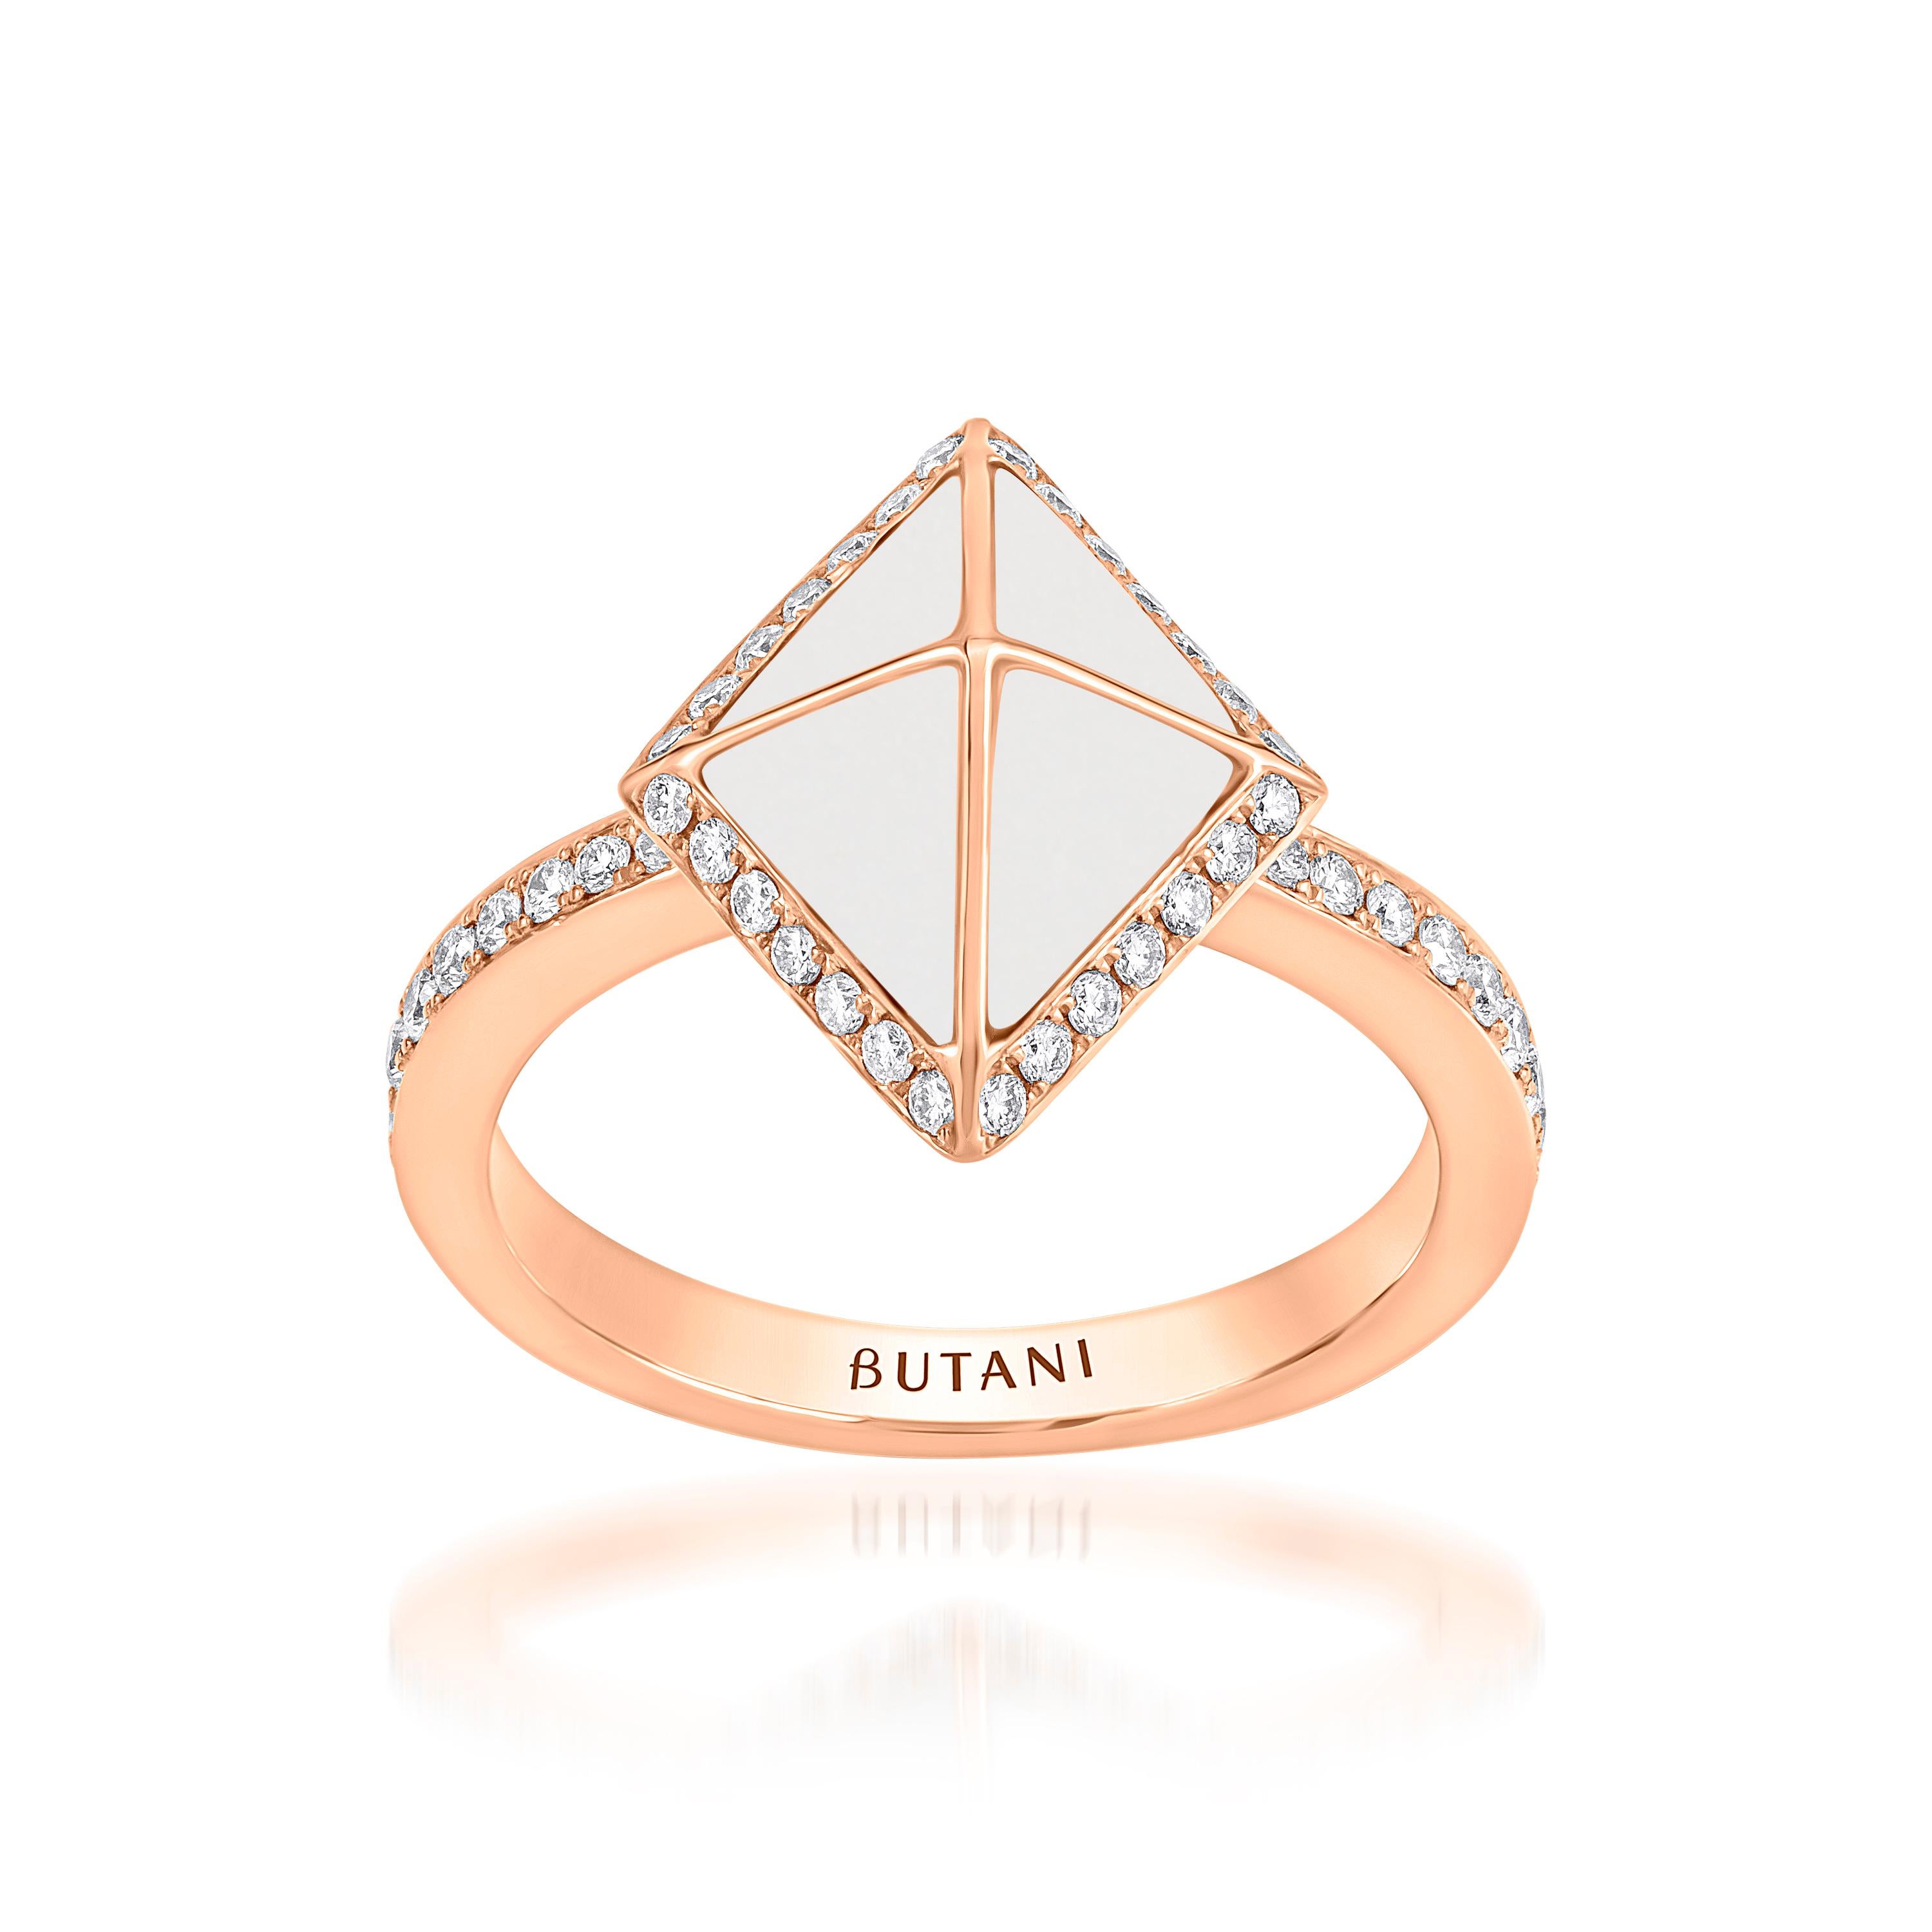 Through graphic, contemporary lines, Butani’s Tetra collection celebrates the beauty of symmetry while reimagining classic motifs of the past. 

Powerful and elegant, the Tetra Zenith Ring draws eyes and forms a striking focal point on the finger. A